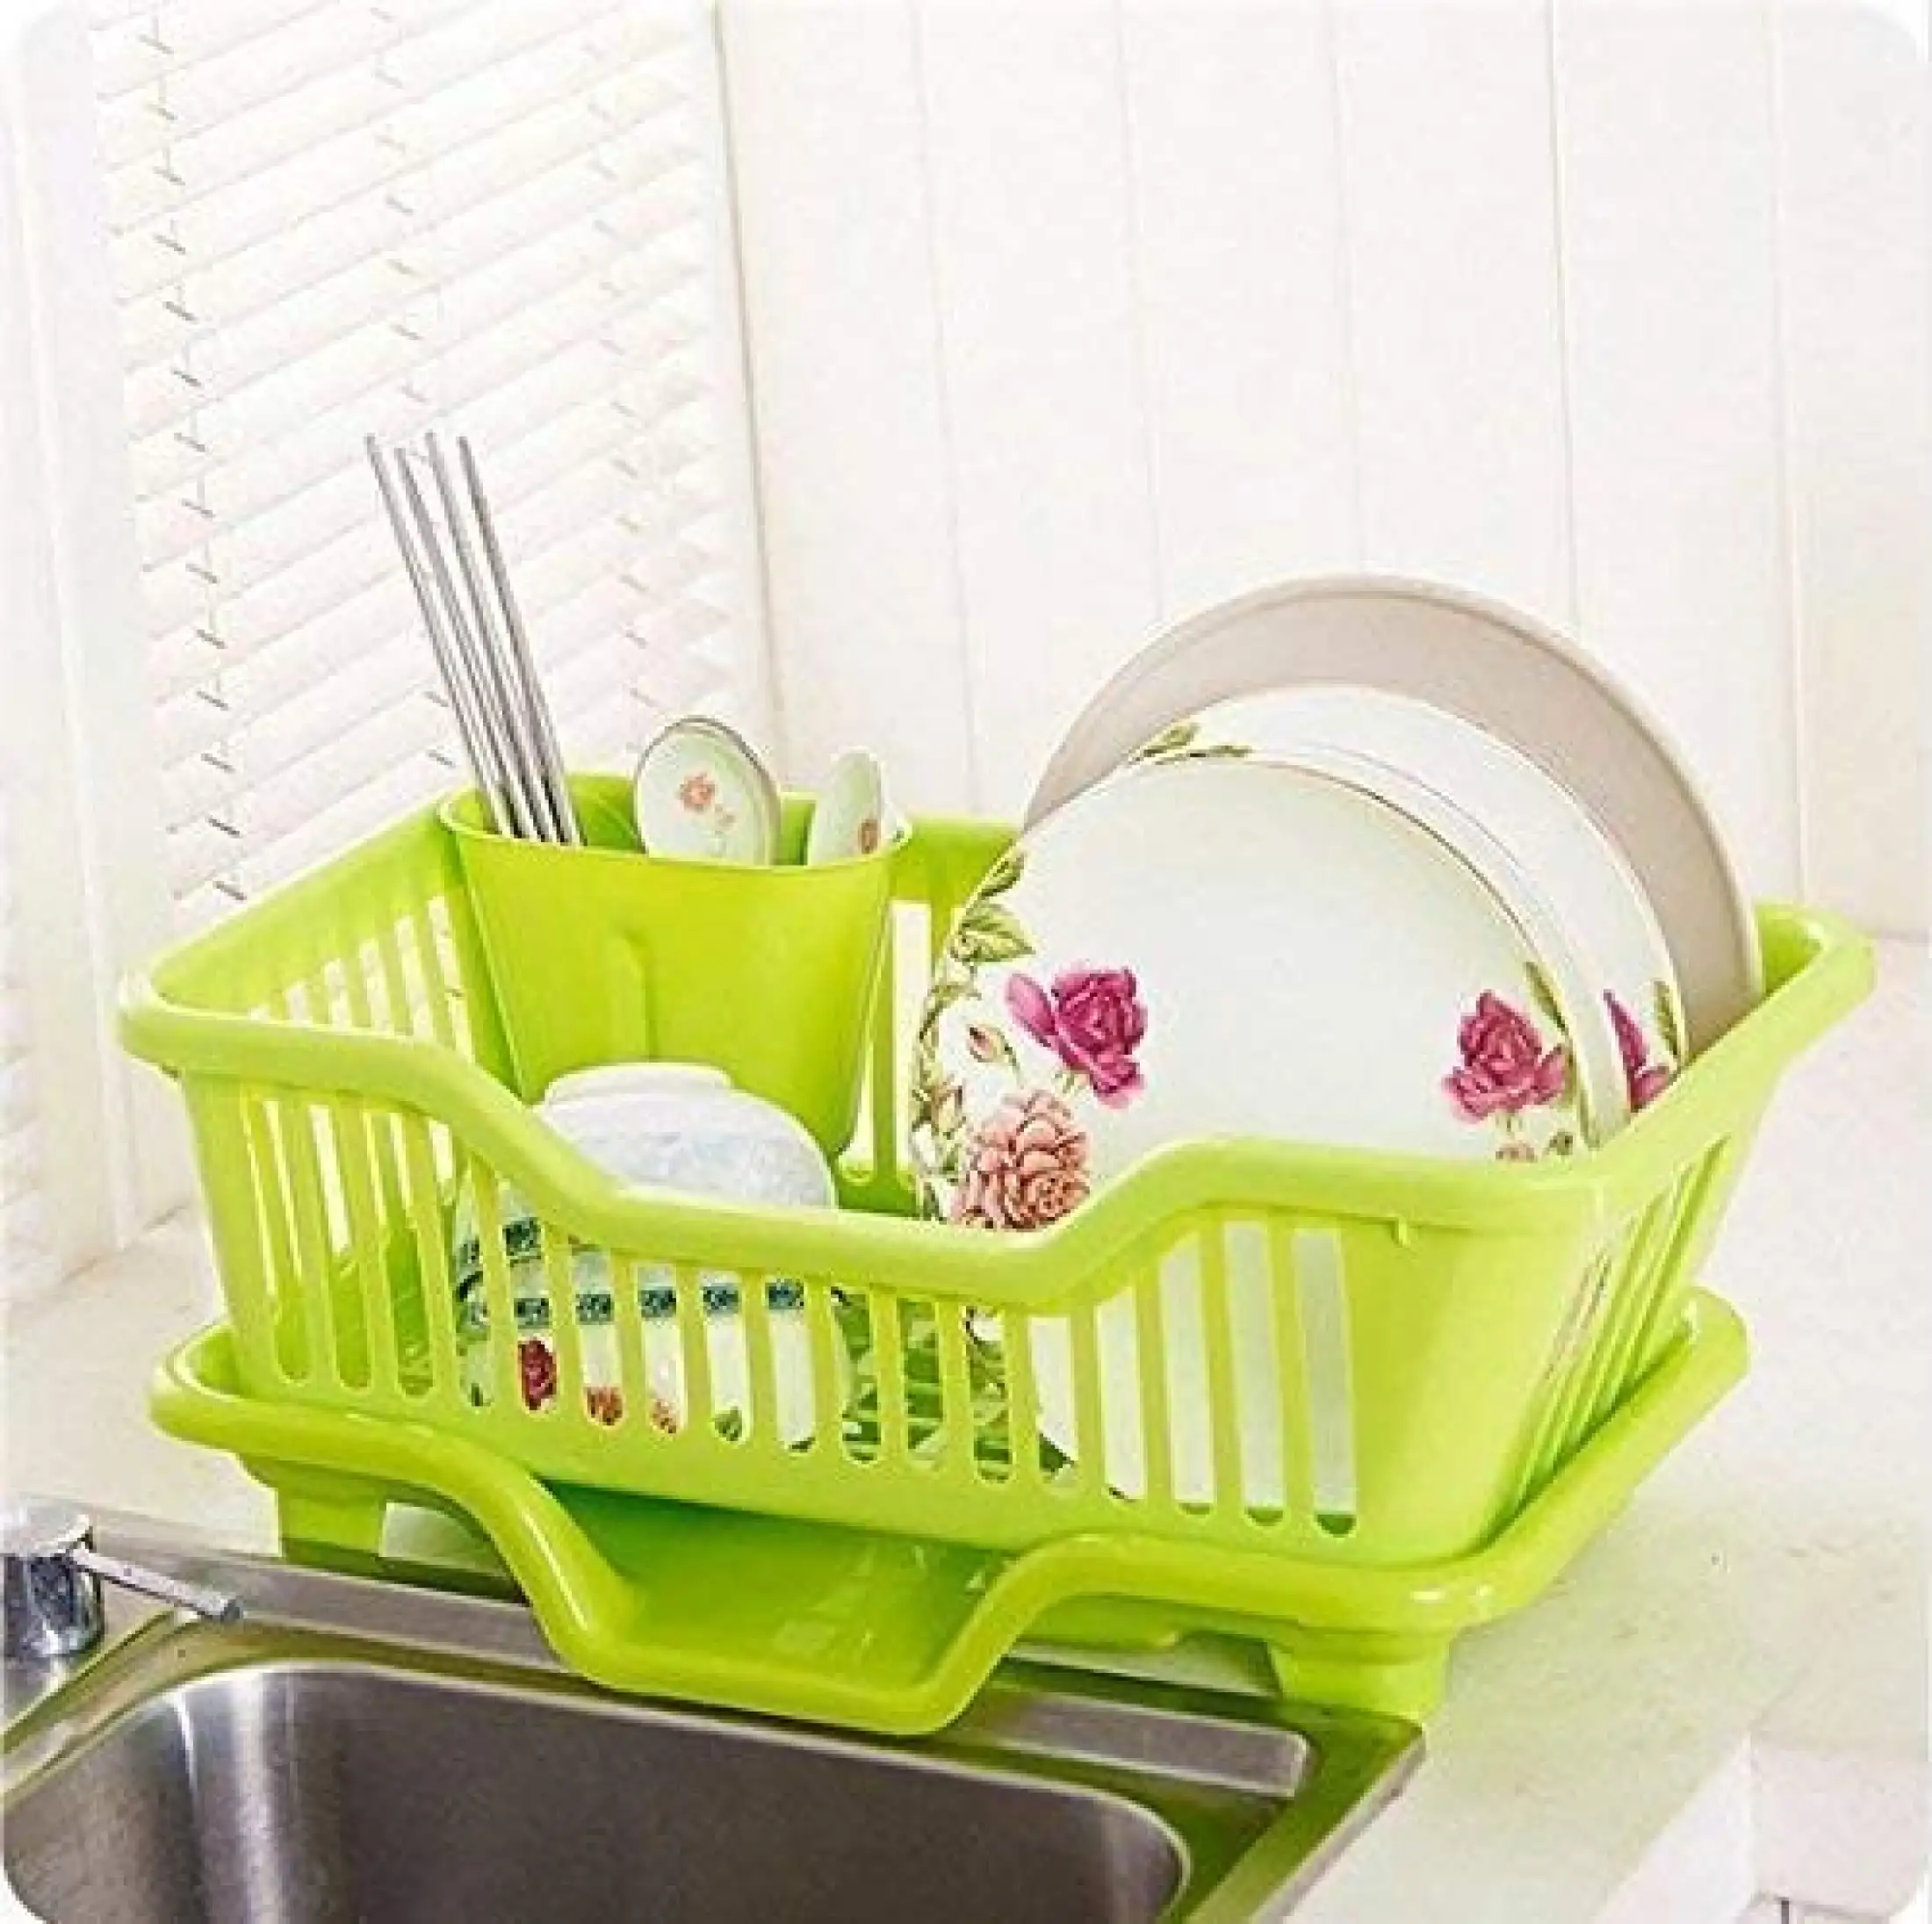 Dish Rack Large Durable Plastic Kitchen Sink Dish Rack Drainer Drying Rack Washing Basket With Tray For Kitchen Dish Rack Organizers Utensils Tools Cutlery Lazada Ph